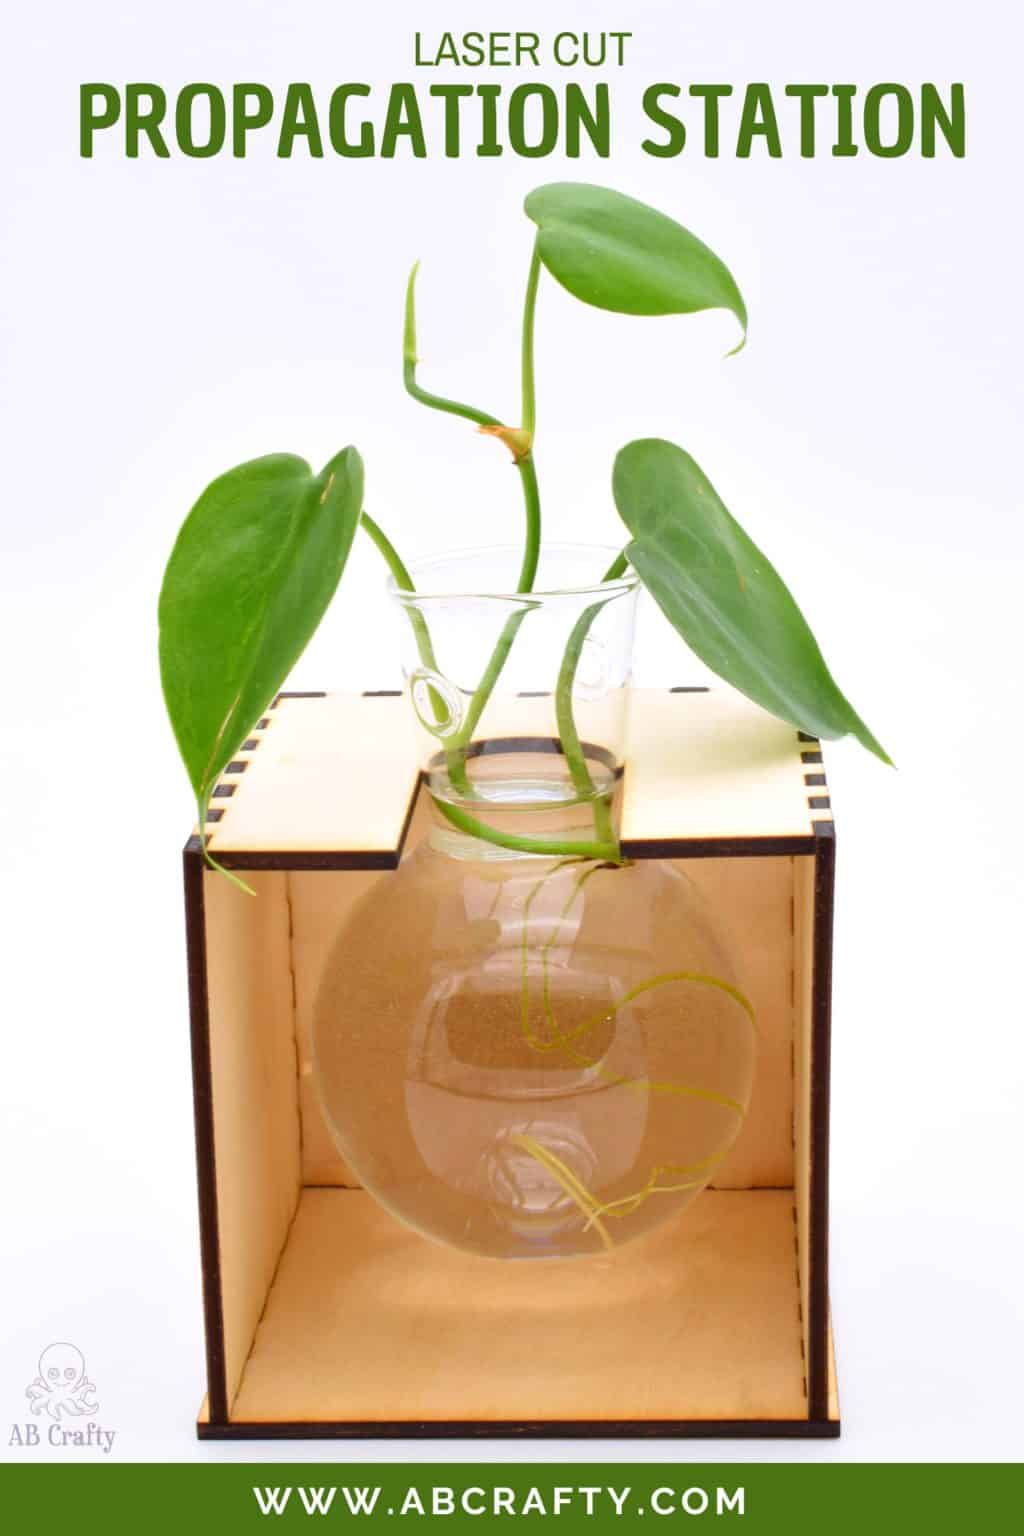 finished laser cut plant propagation station with a bulb vase holding a small vine plant with the title "laser cut propagation station, abcrafty.com"